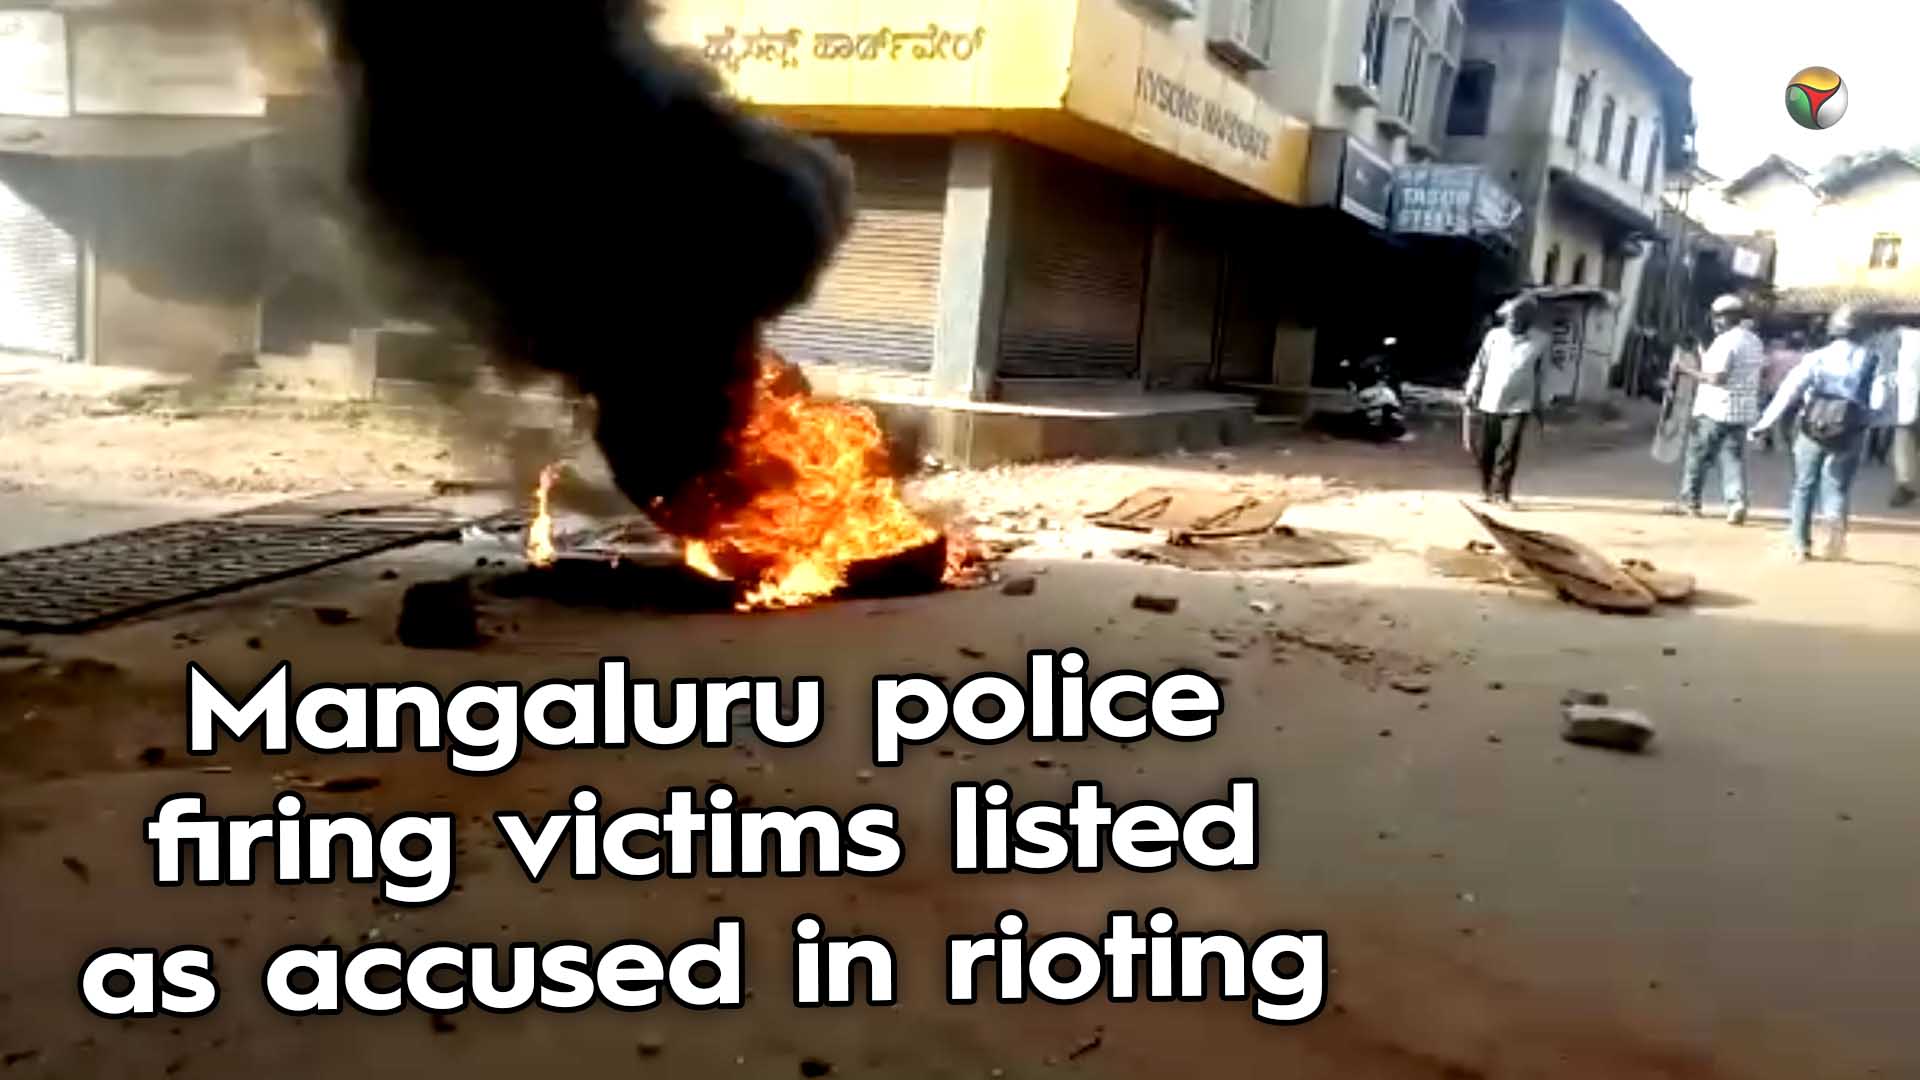 Mangaluru police firing victims listed as accused in rioting